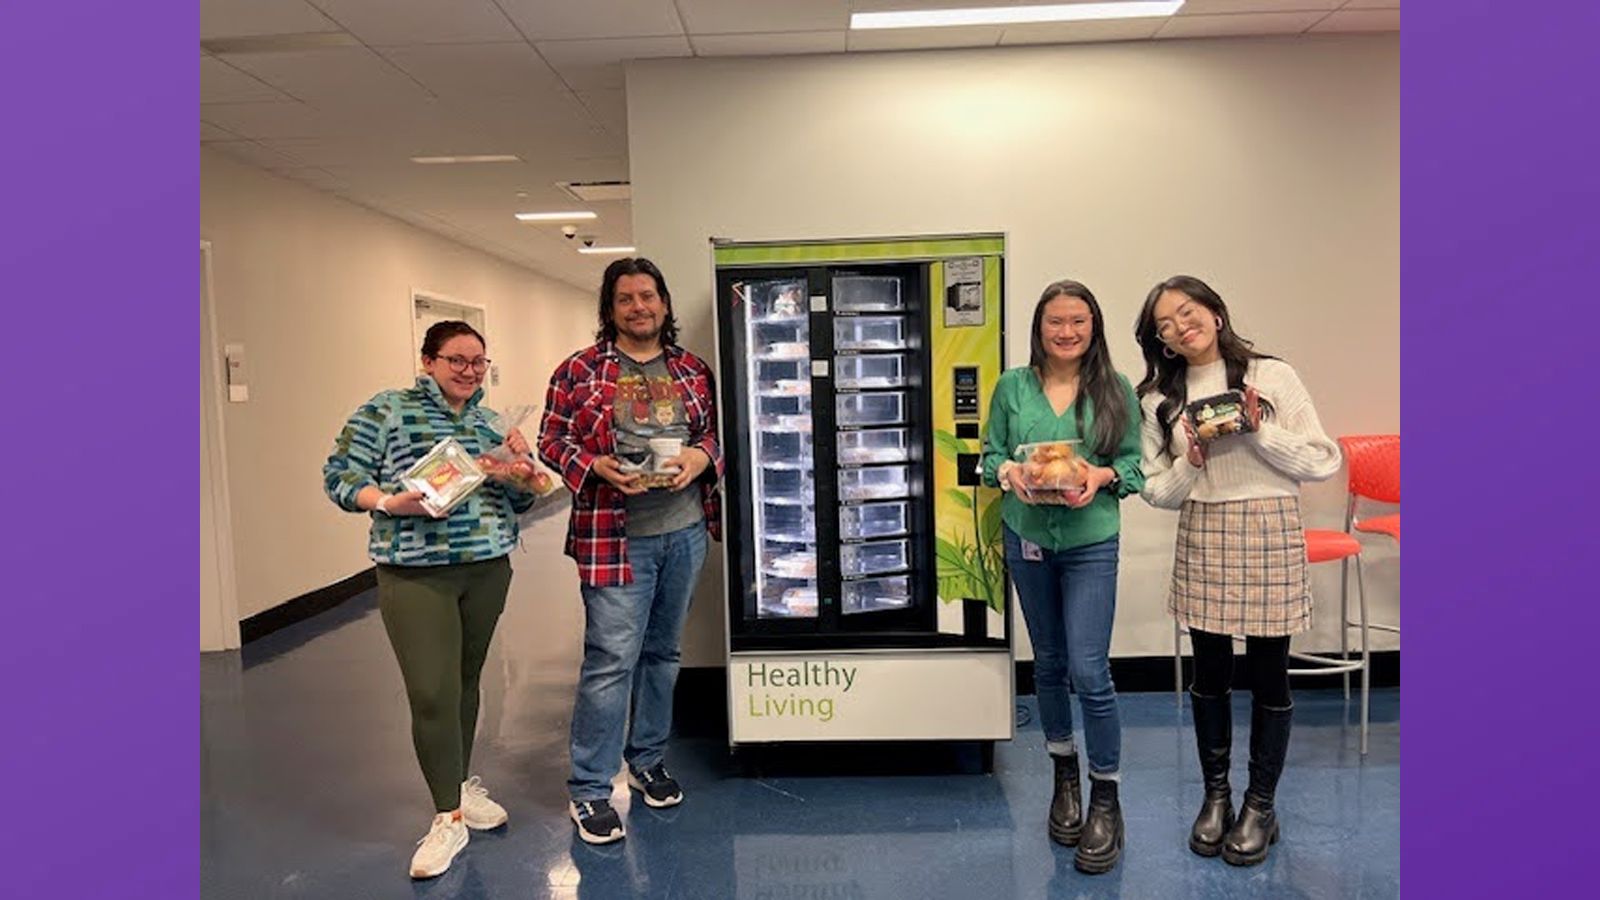 Students from the Silberman School of Social Work display healthy items from the Smart Pantry